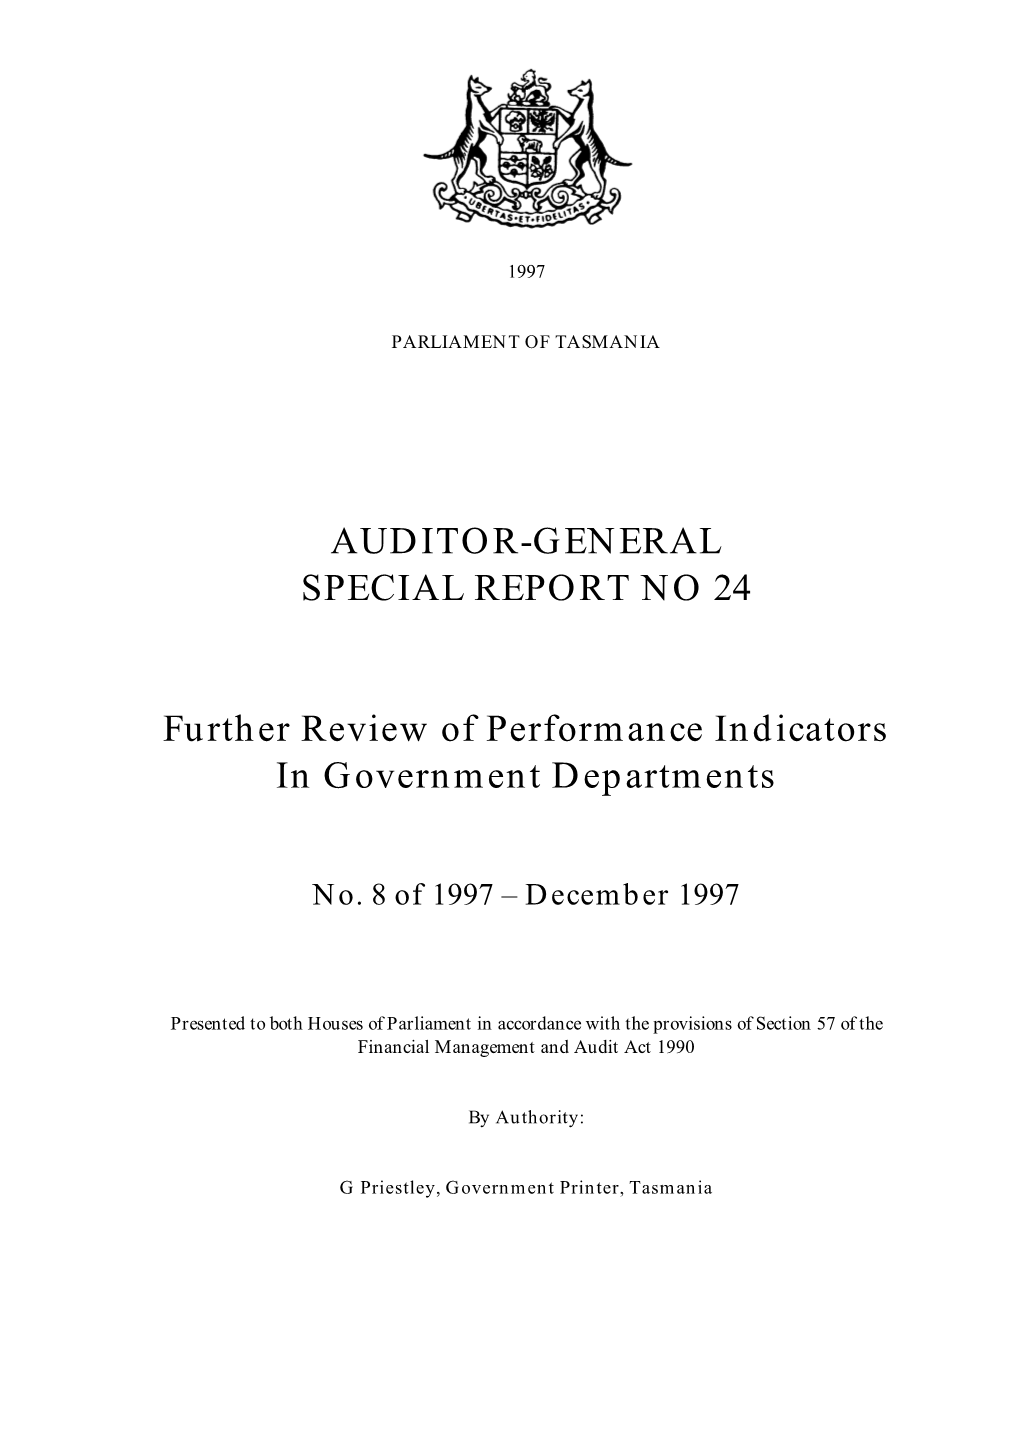 AUDITOR-GENERAL SPECIAL REPORT NO 24 Further Review Of